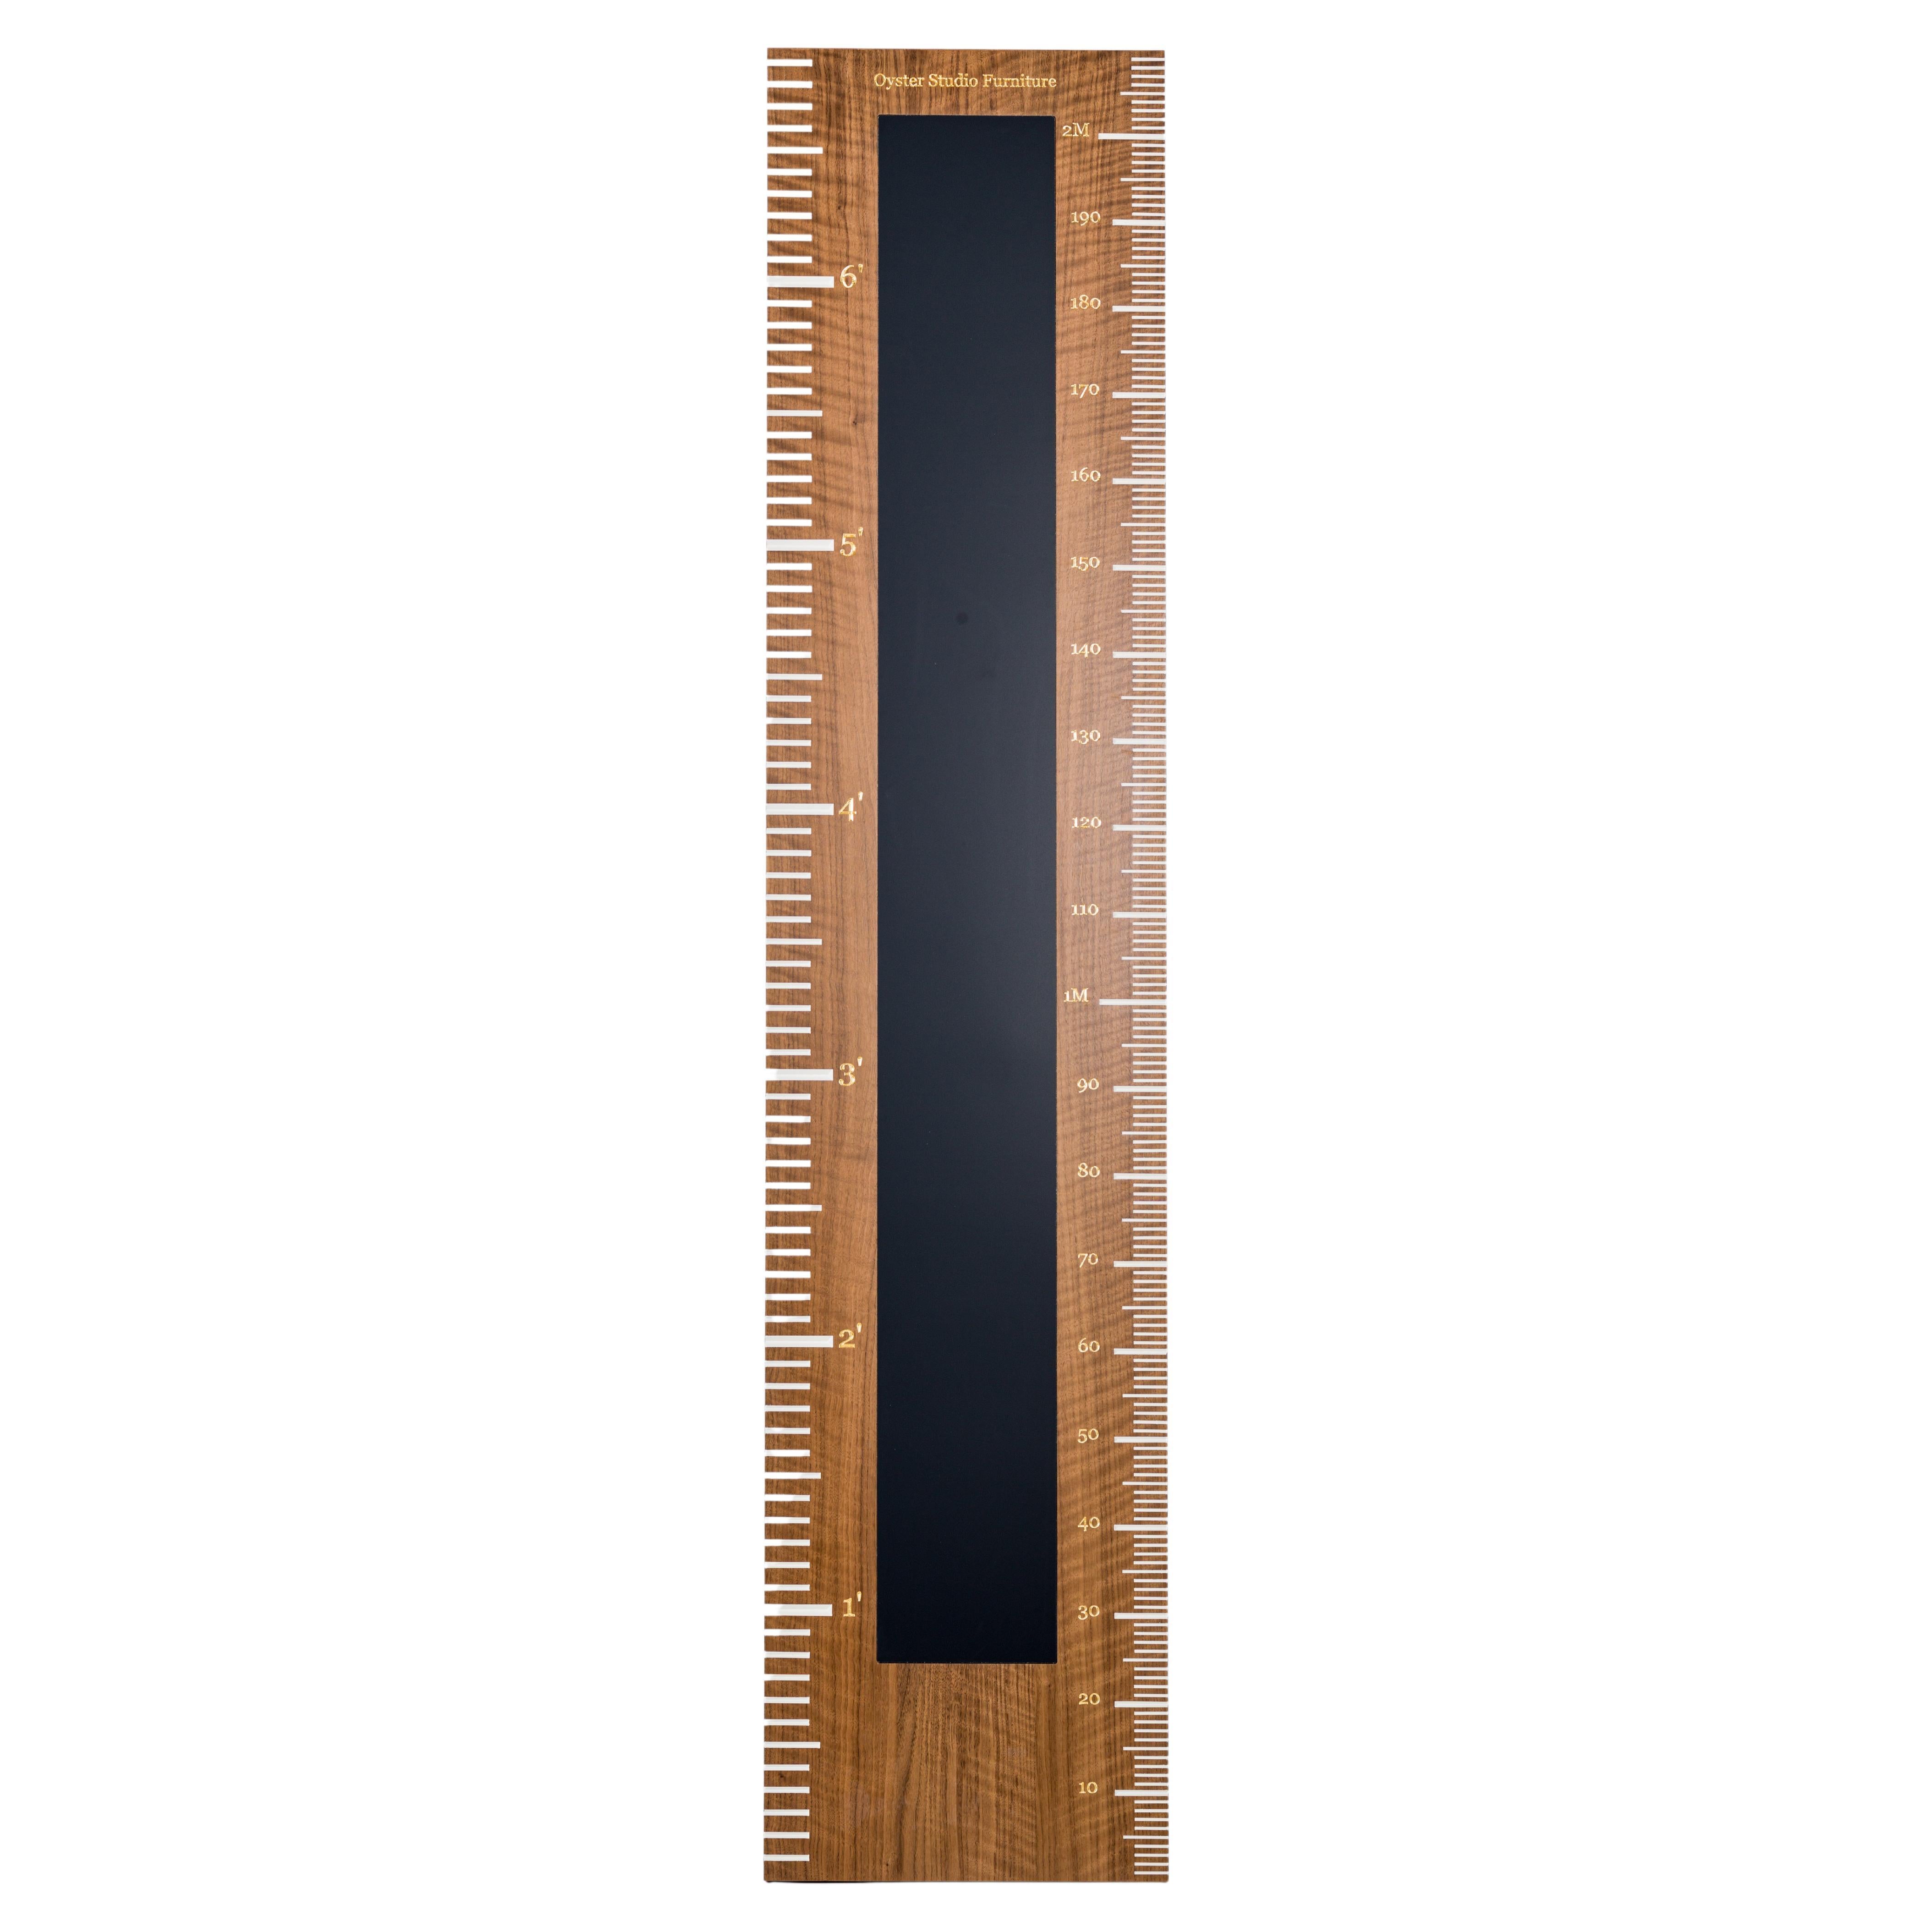 Children's Growth Chart For Sale